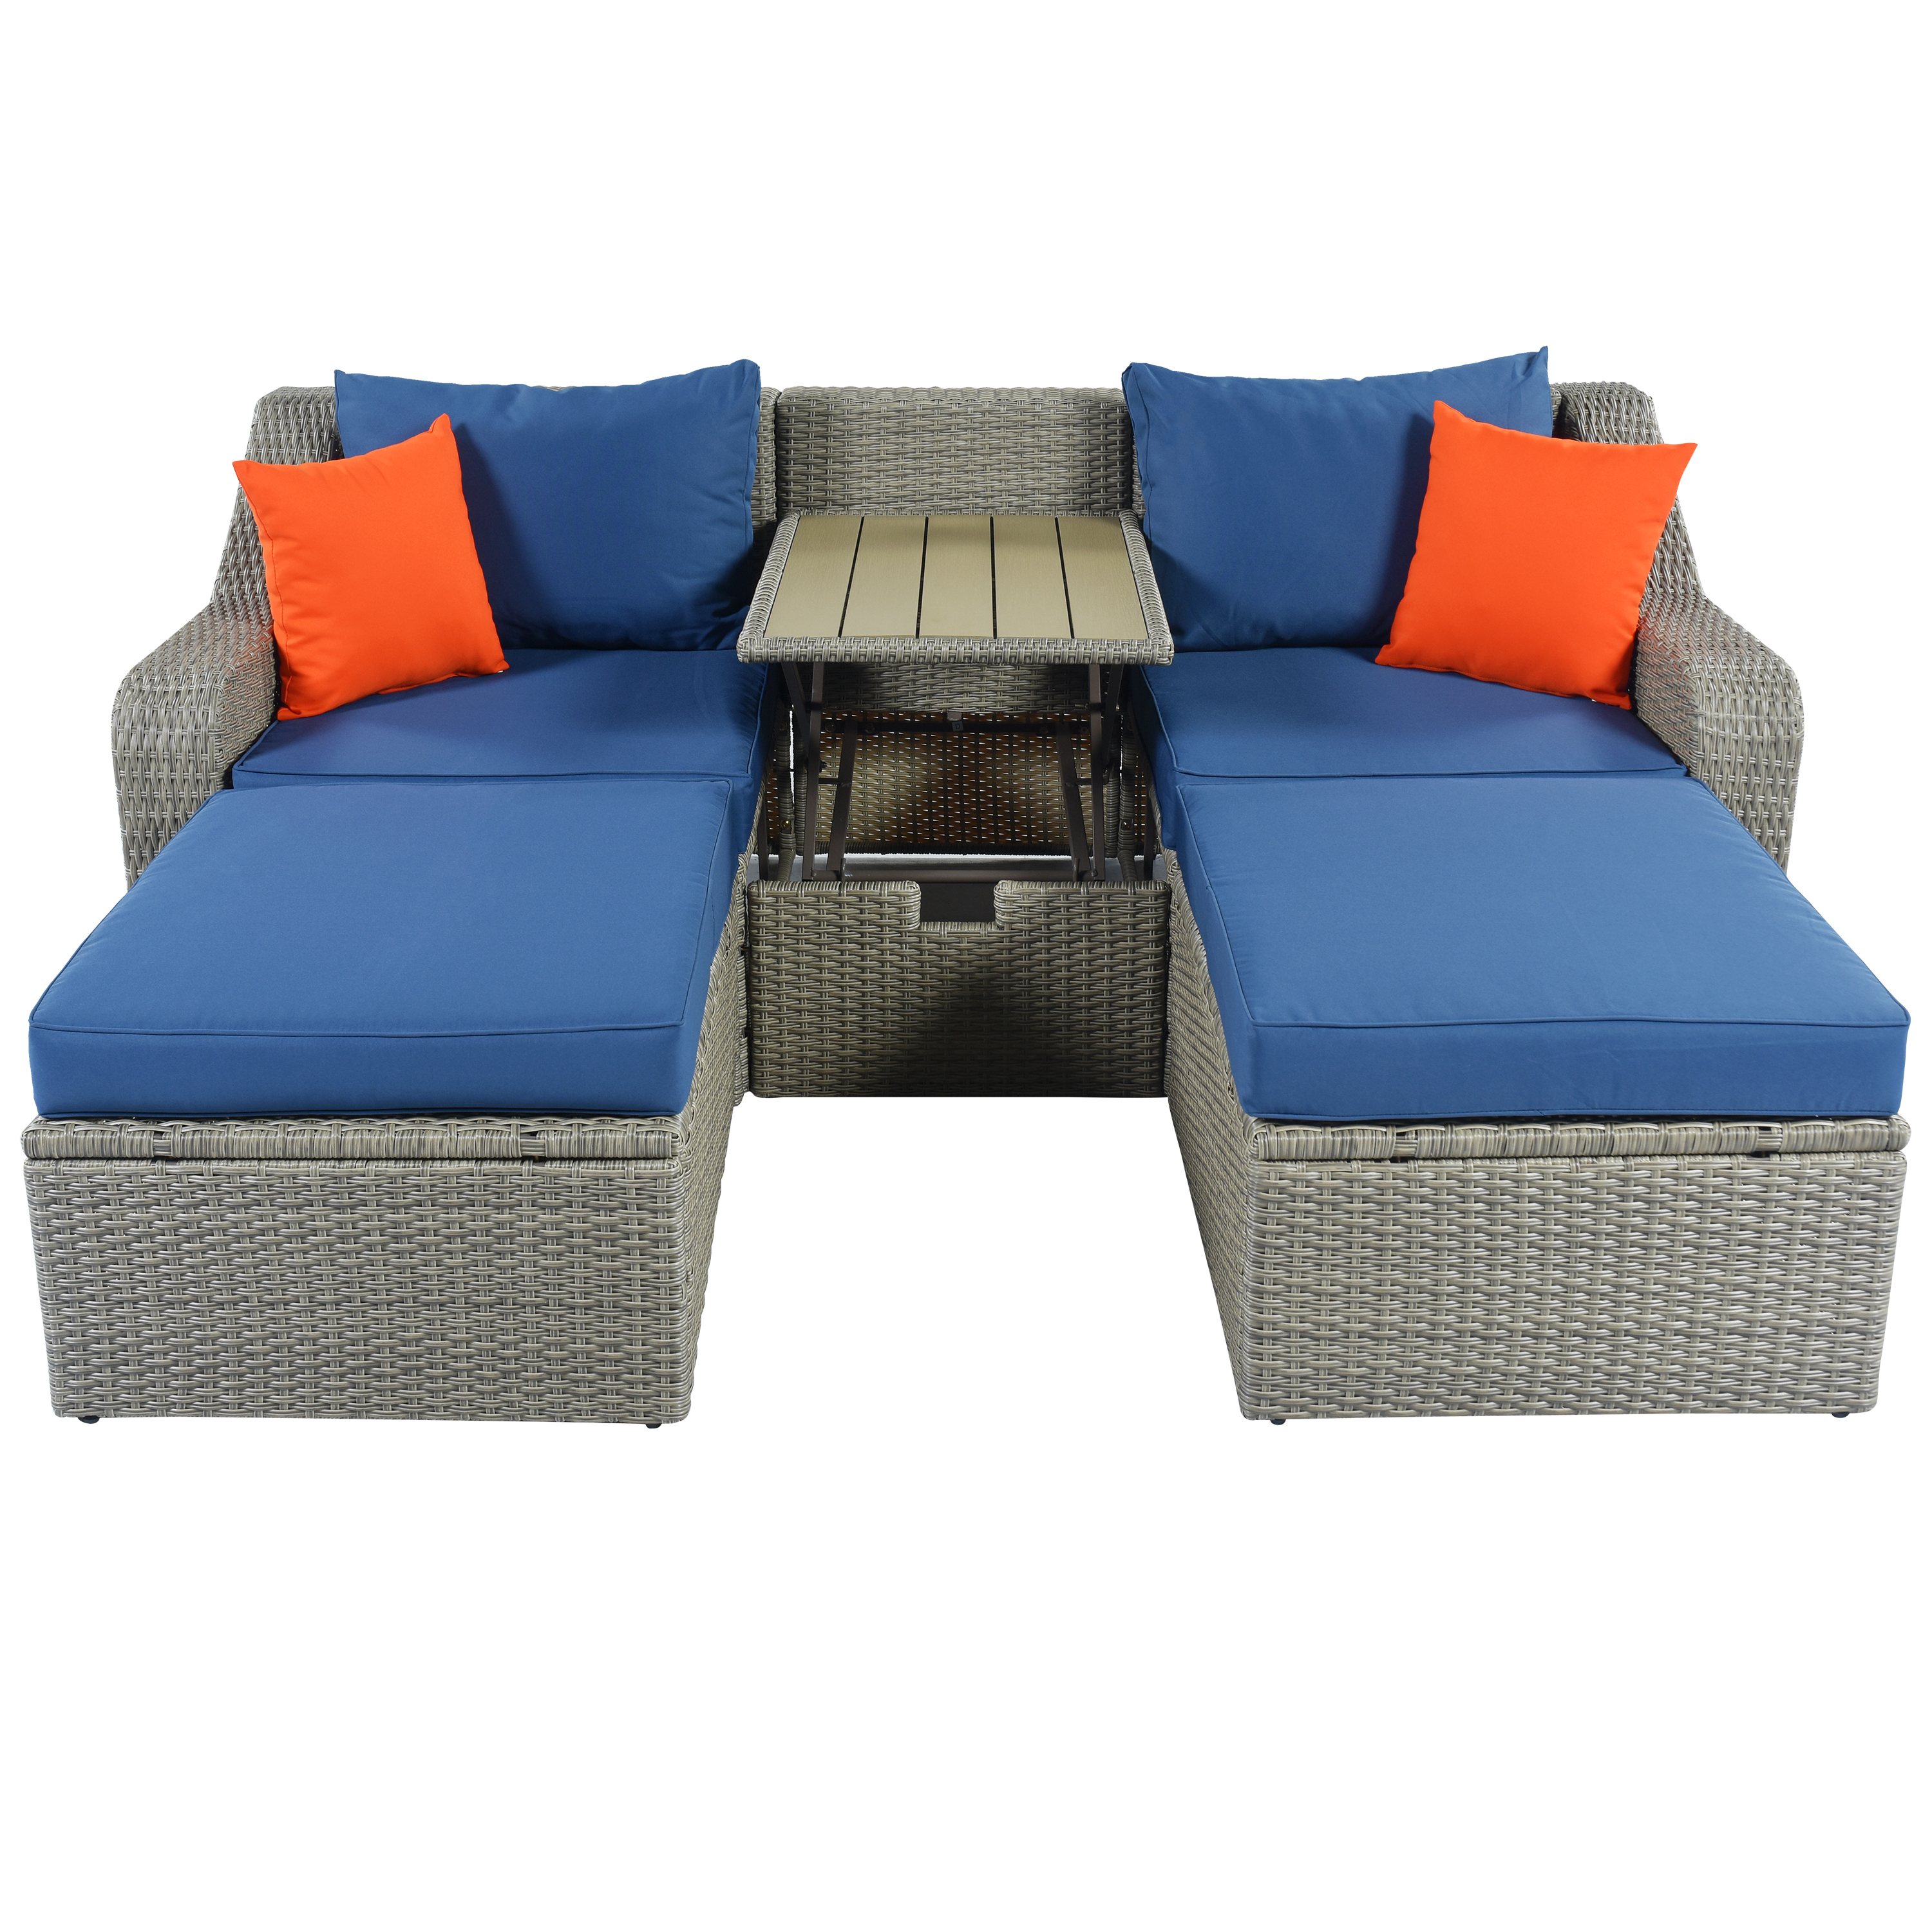  Patio Furniture Sets, 3-Piece Patio Wicker Sofa with  Cushions, Pillows, Ottomans and Lift Top Coffee Table-CASAINC